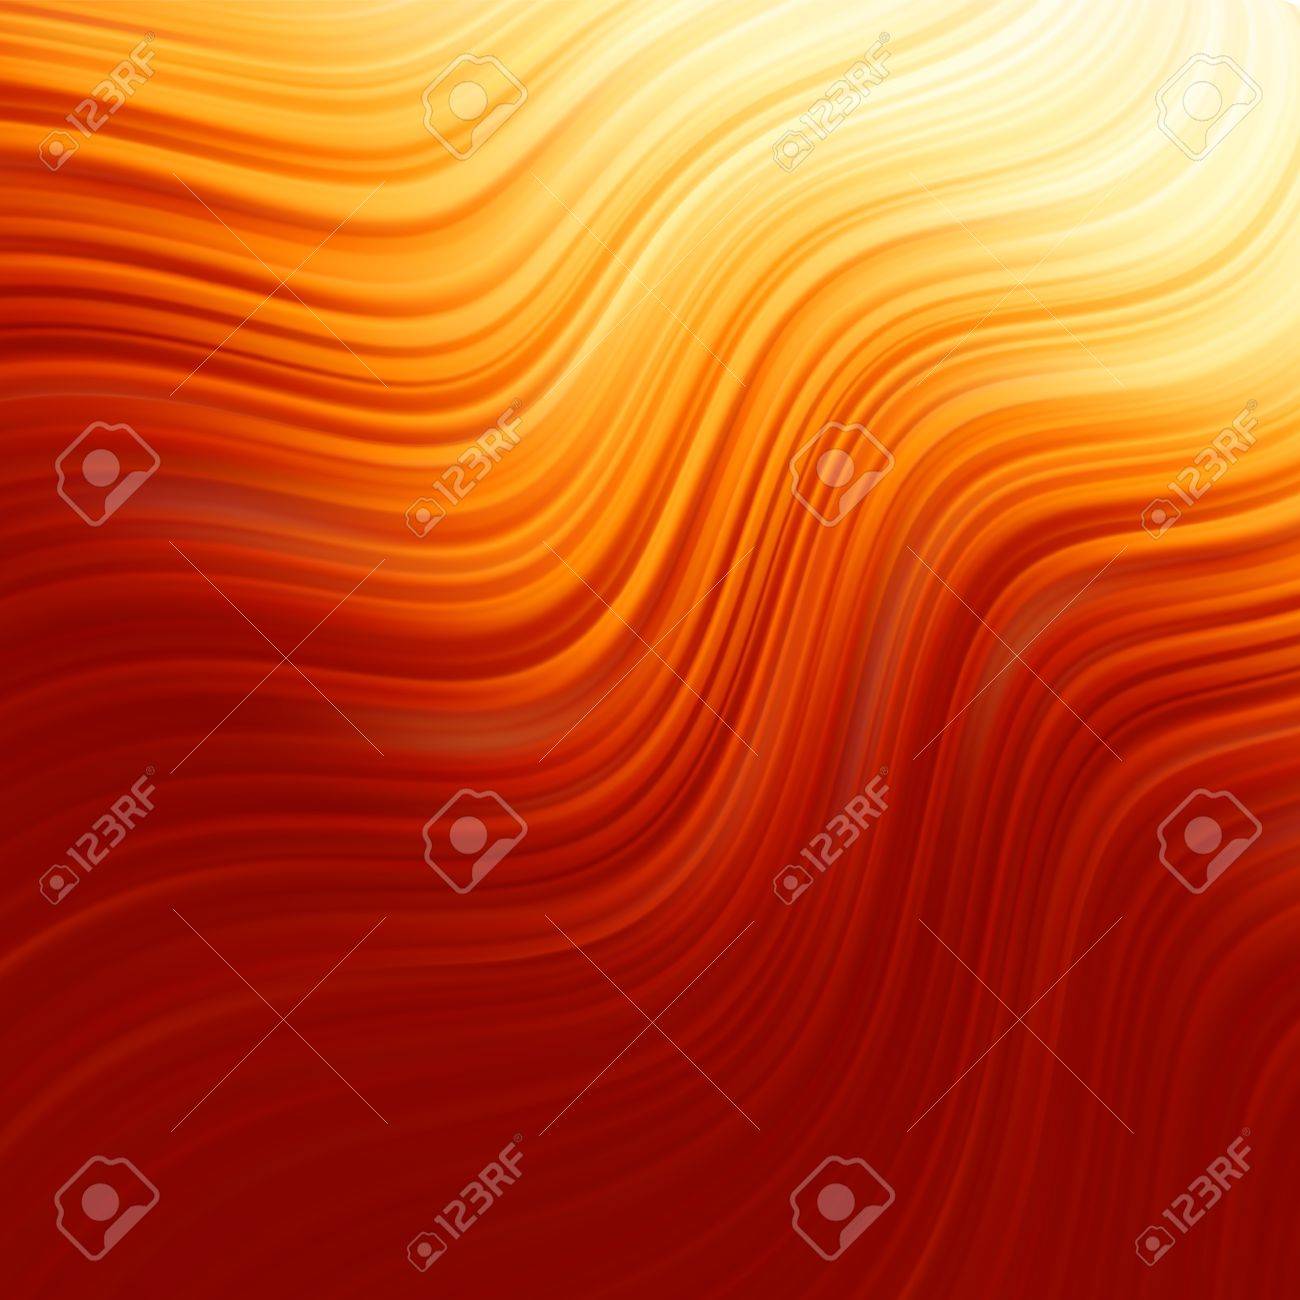 Abstract Glow Twist Background With Golden Flow Royalty